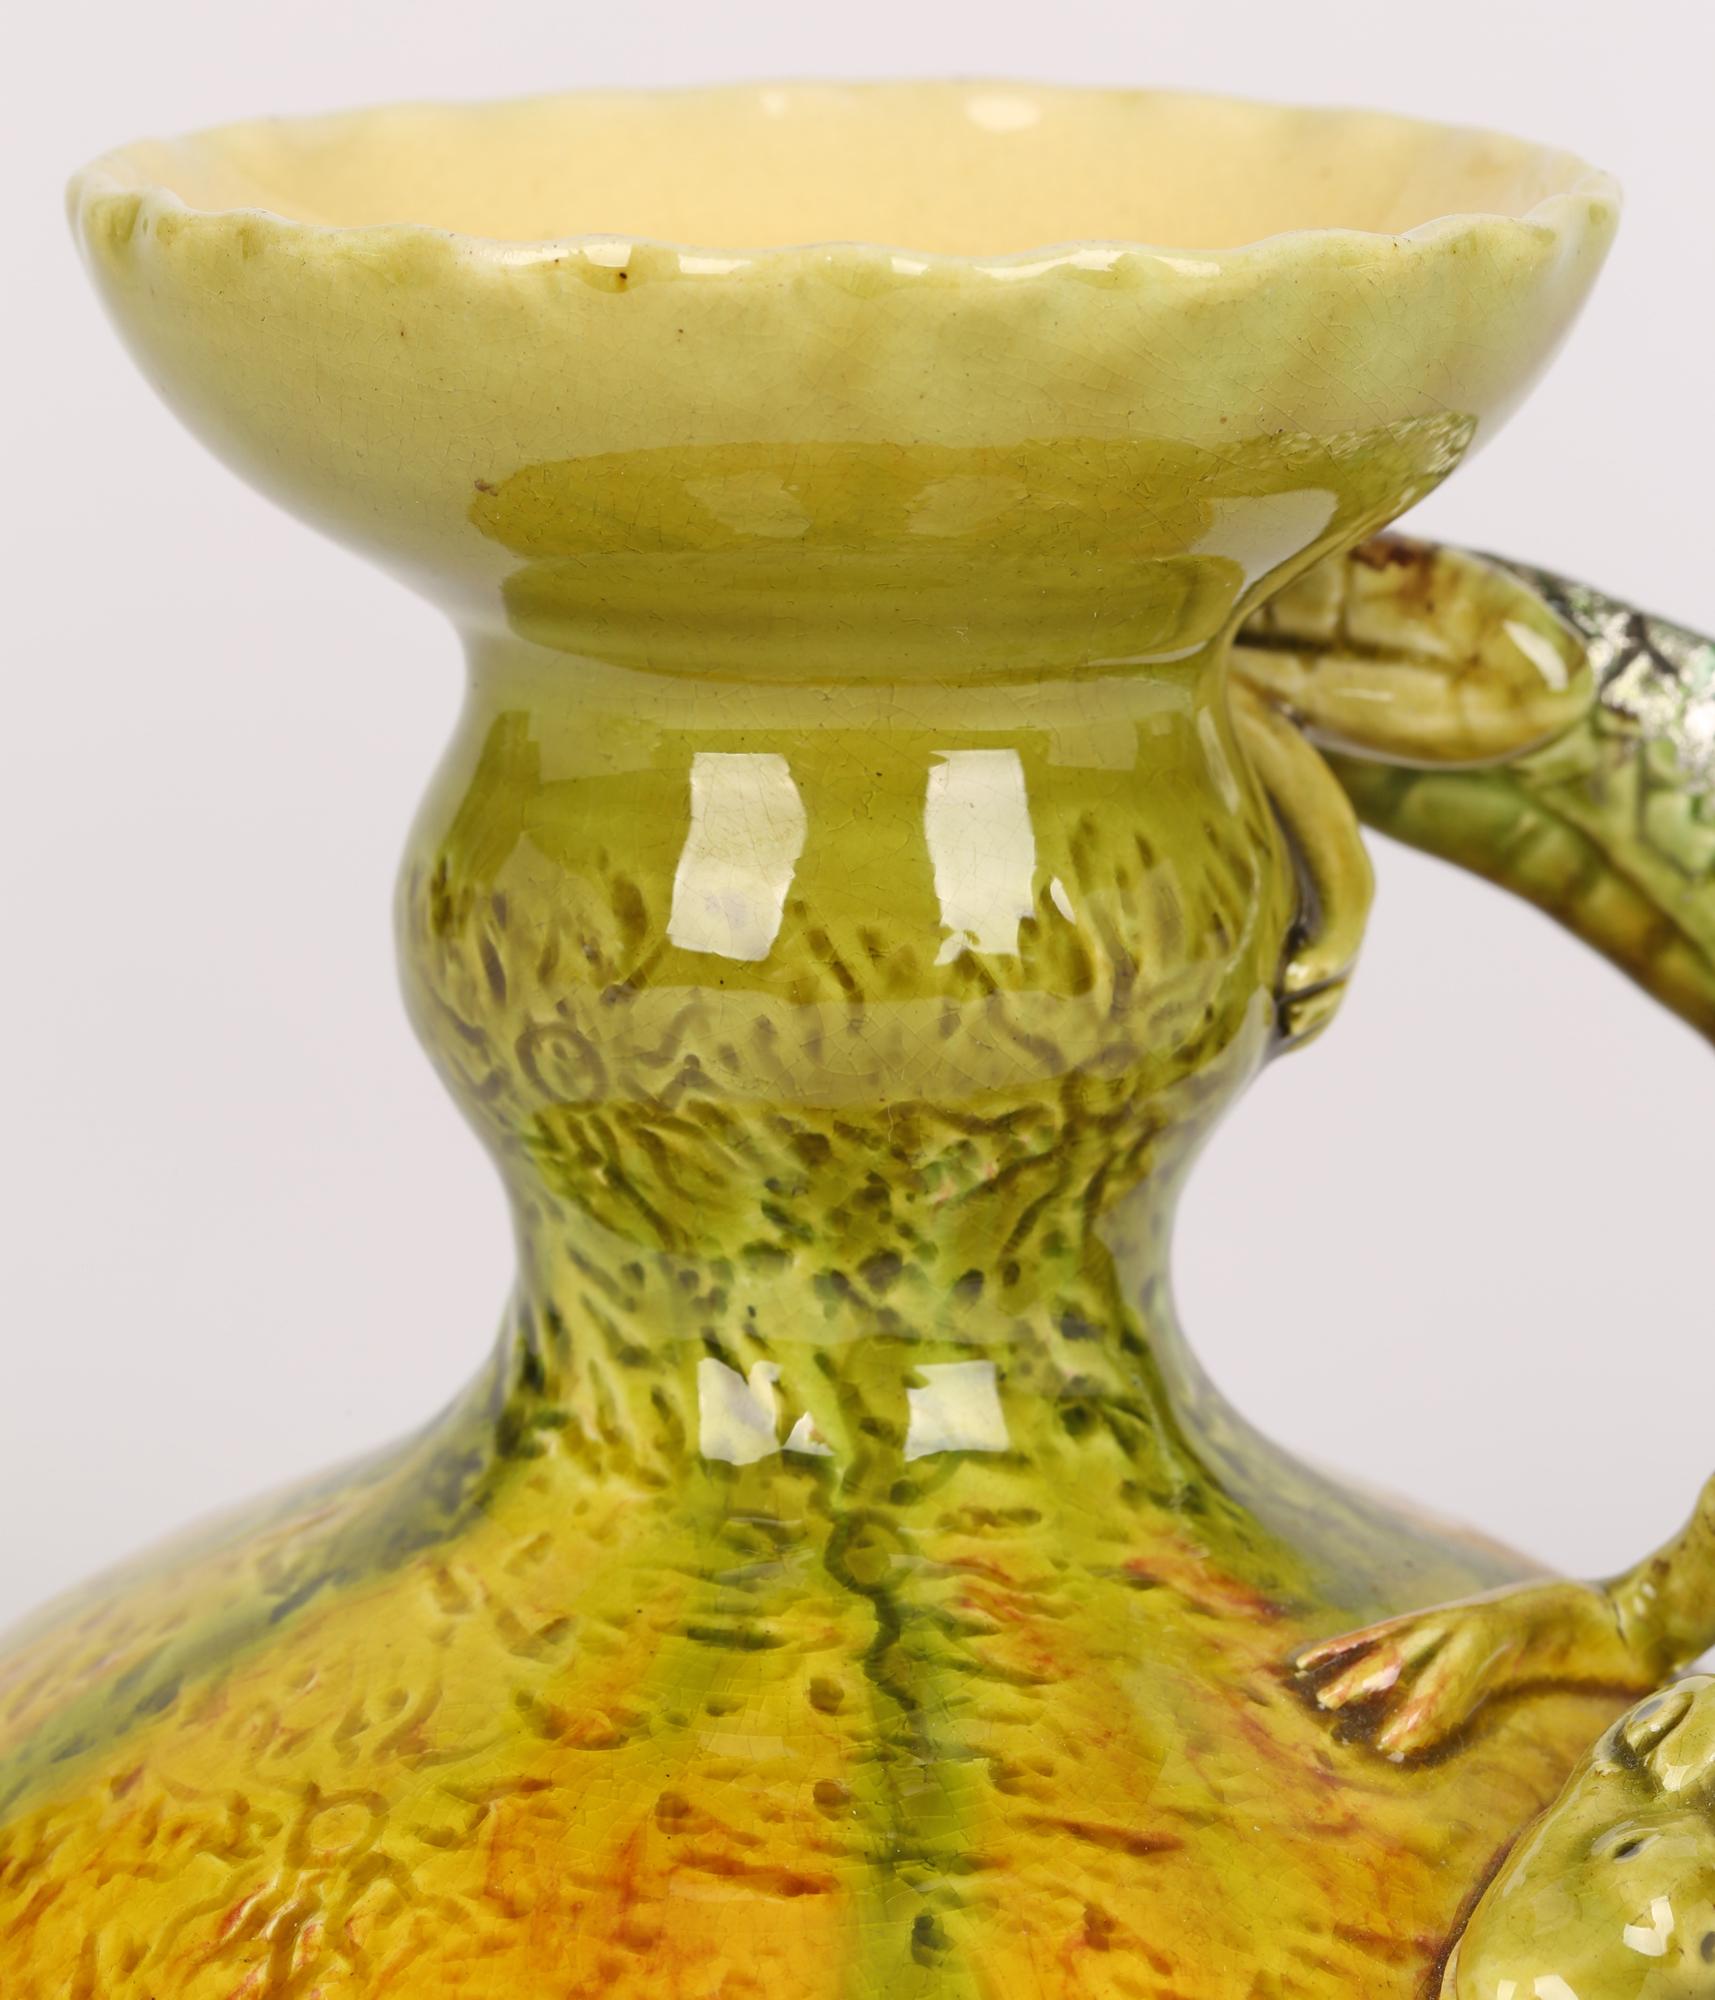 A rare Burmantofts Faience pottery chamberstick with a grotesque alligator modelled handle dating from 1880’s. The chamberstick has a wide round domed base with a pinched column stem and fluted edged bowl-shaped top with integral candleholder. The